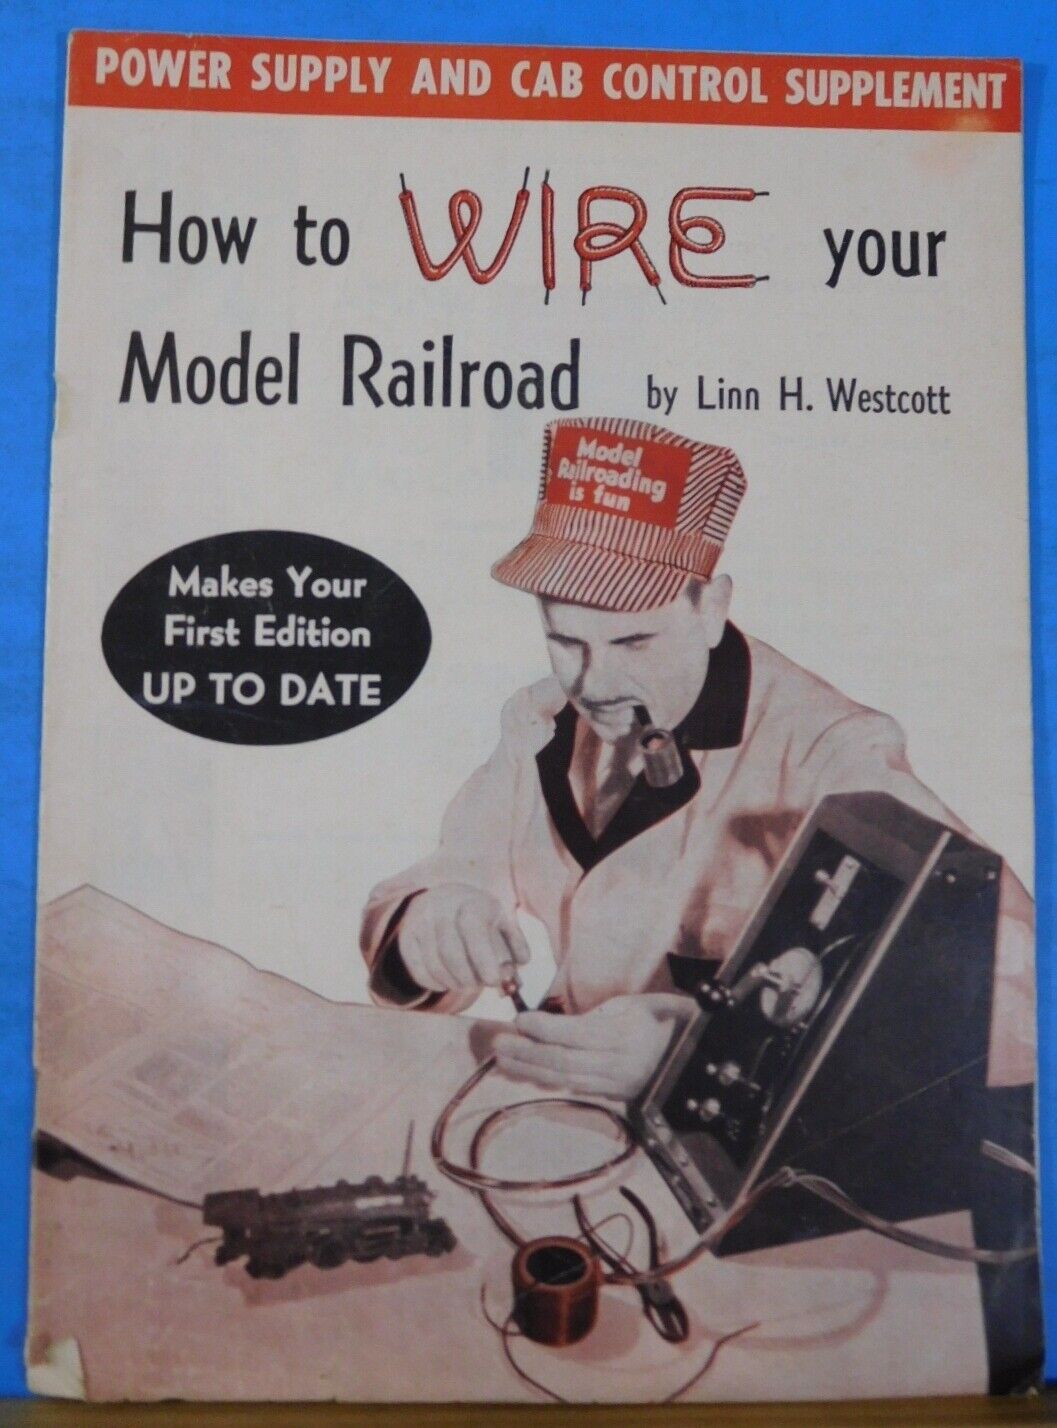 How to Wire your model Railroad Supplement to First Edition by Linn H. Westcott.